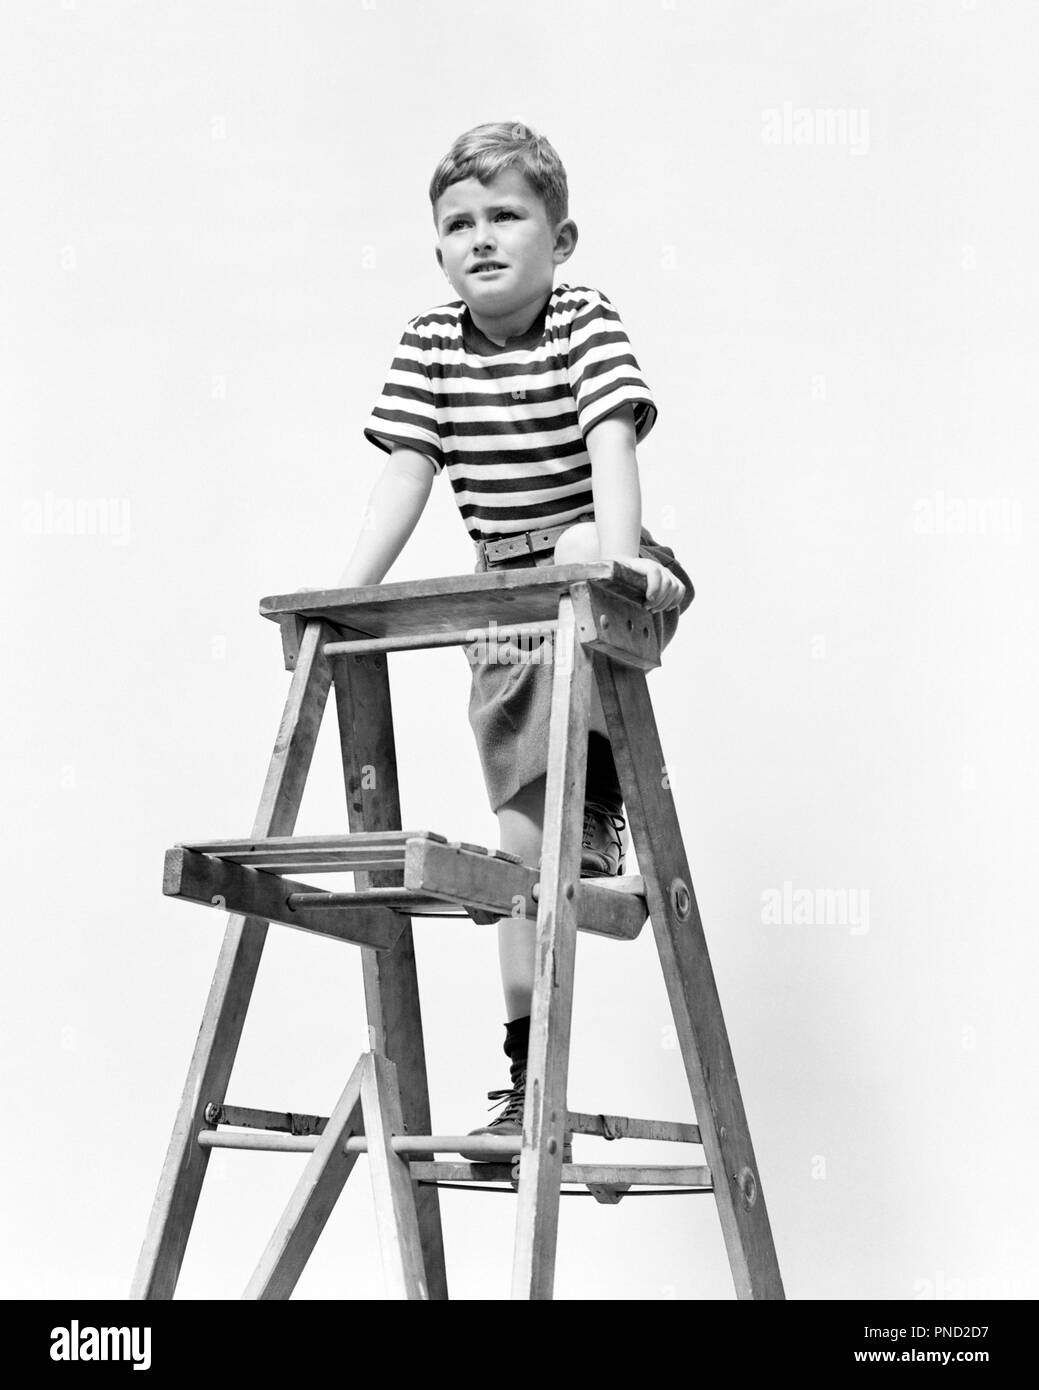 1940s BOY WEARING STRIPED T-SHIRT CLIMBING TALL STEP LADDER - j9766 HAR001 HARS CLIMB DANGEROUS STRENGTH COURAGE LOW ANGLE STEP LADDER T-SHIRT STEPLADDER AGGRESSIVE JUVENILES BLACK AND WHITE CAUCASIAN ETHNICITY HAR001 OLD FASHIONED Stock Photo